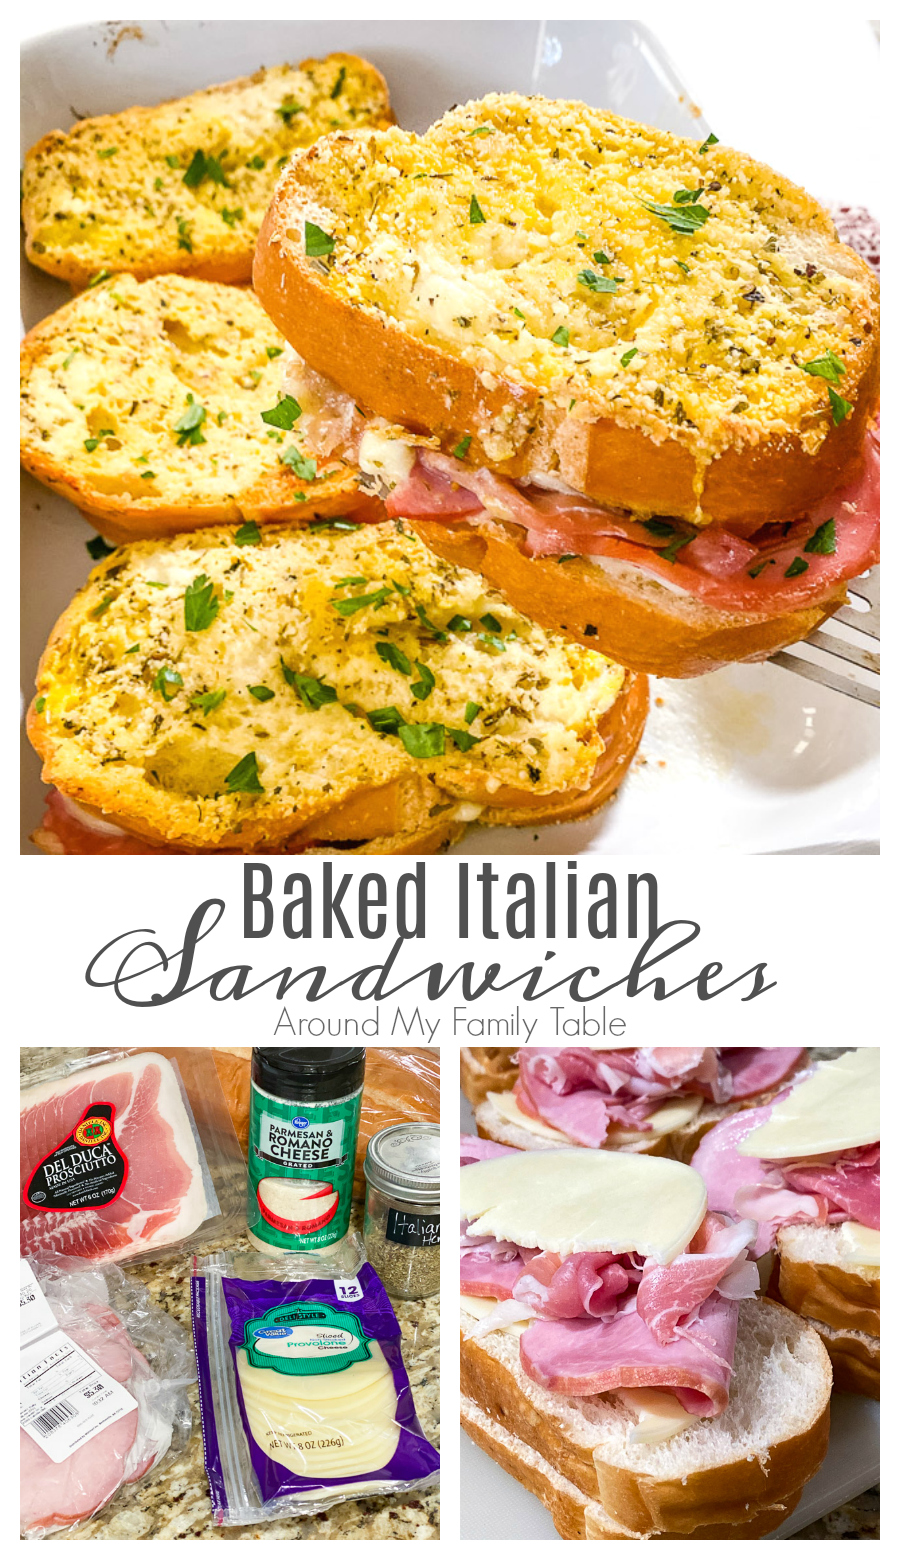 This Baked Italian Sandwich recipe is packed full of flavor and can adjusted to fit what you have on hand. Lots of cheese and meat baked onto hearty bread will make supper a breeze. #sandwiches #bakedsandwiches via @slingmama